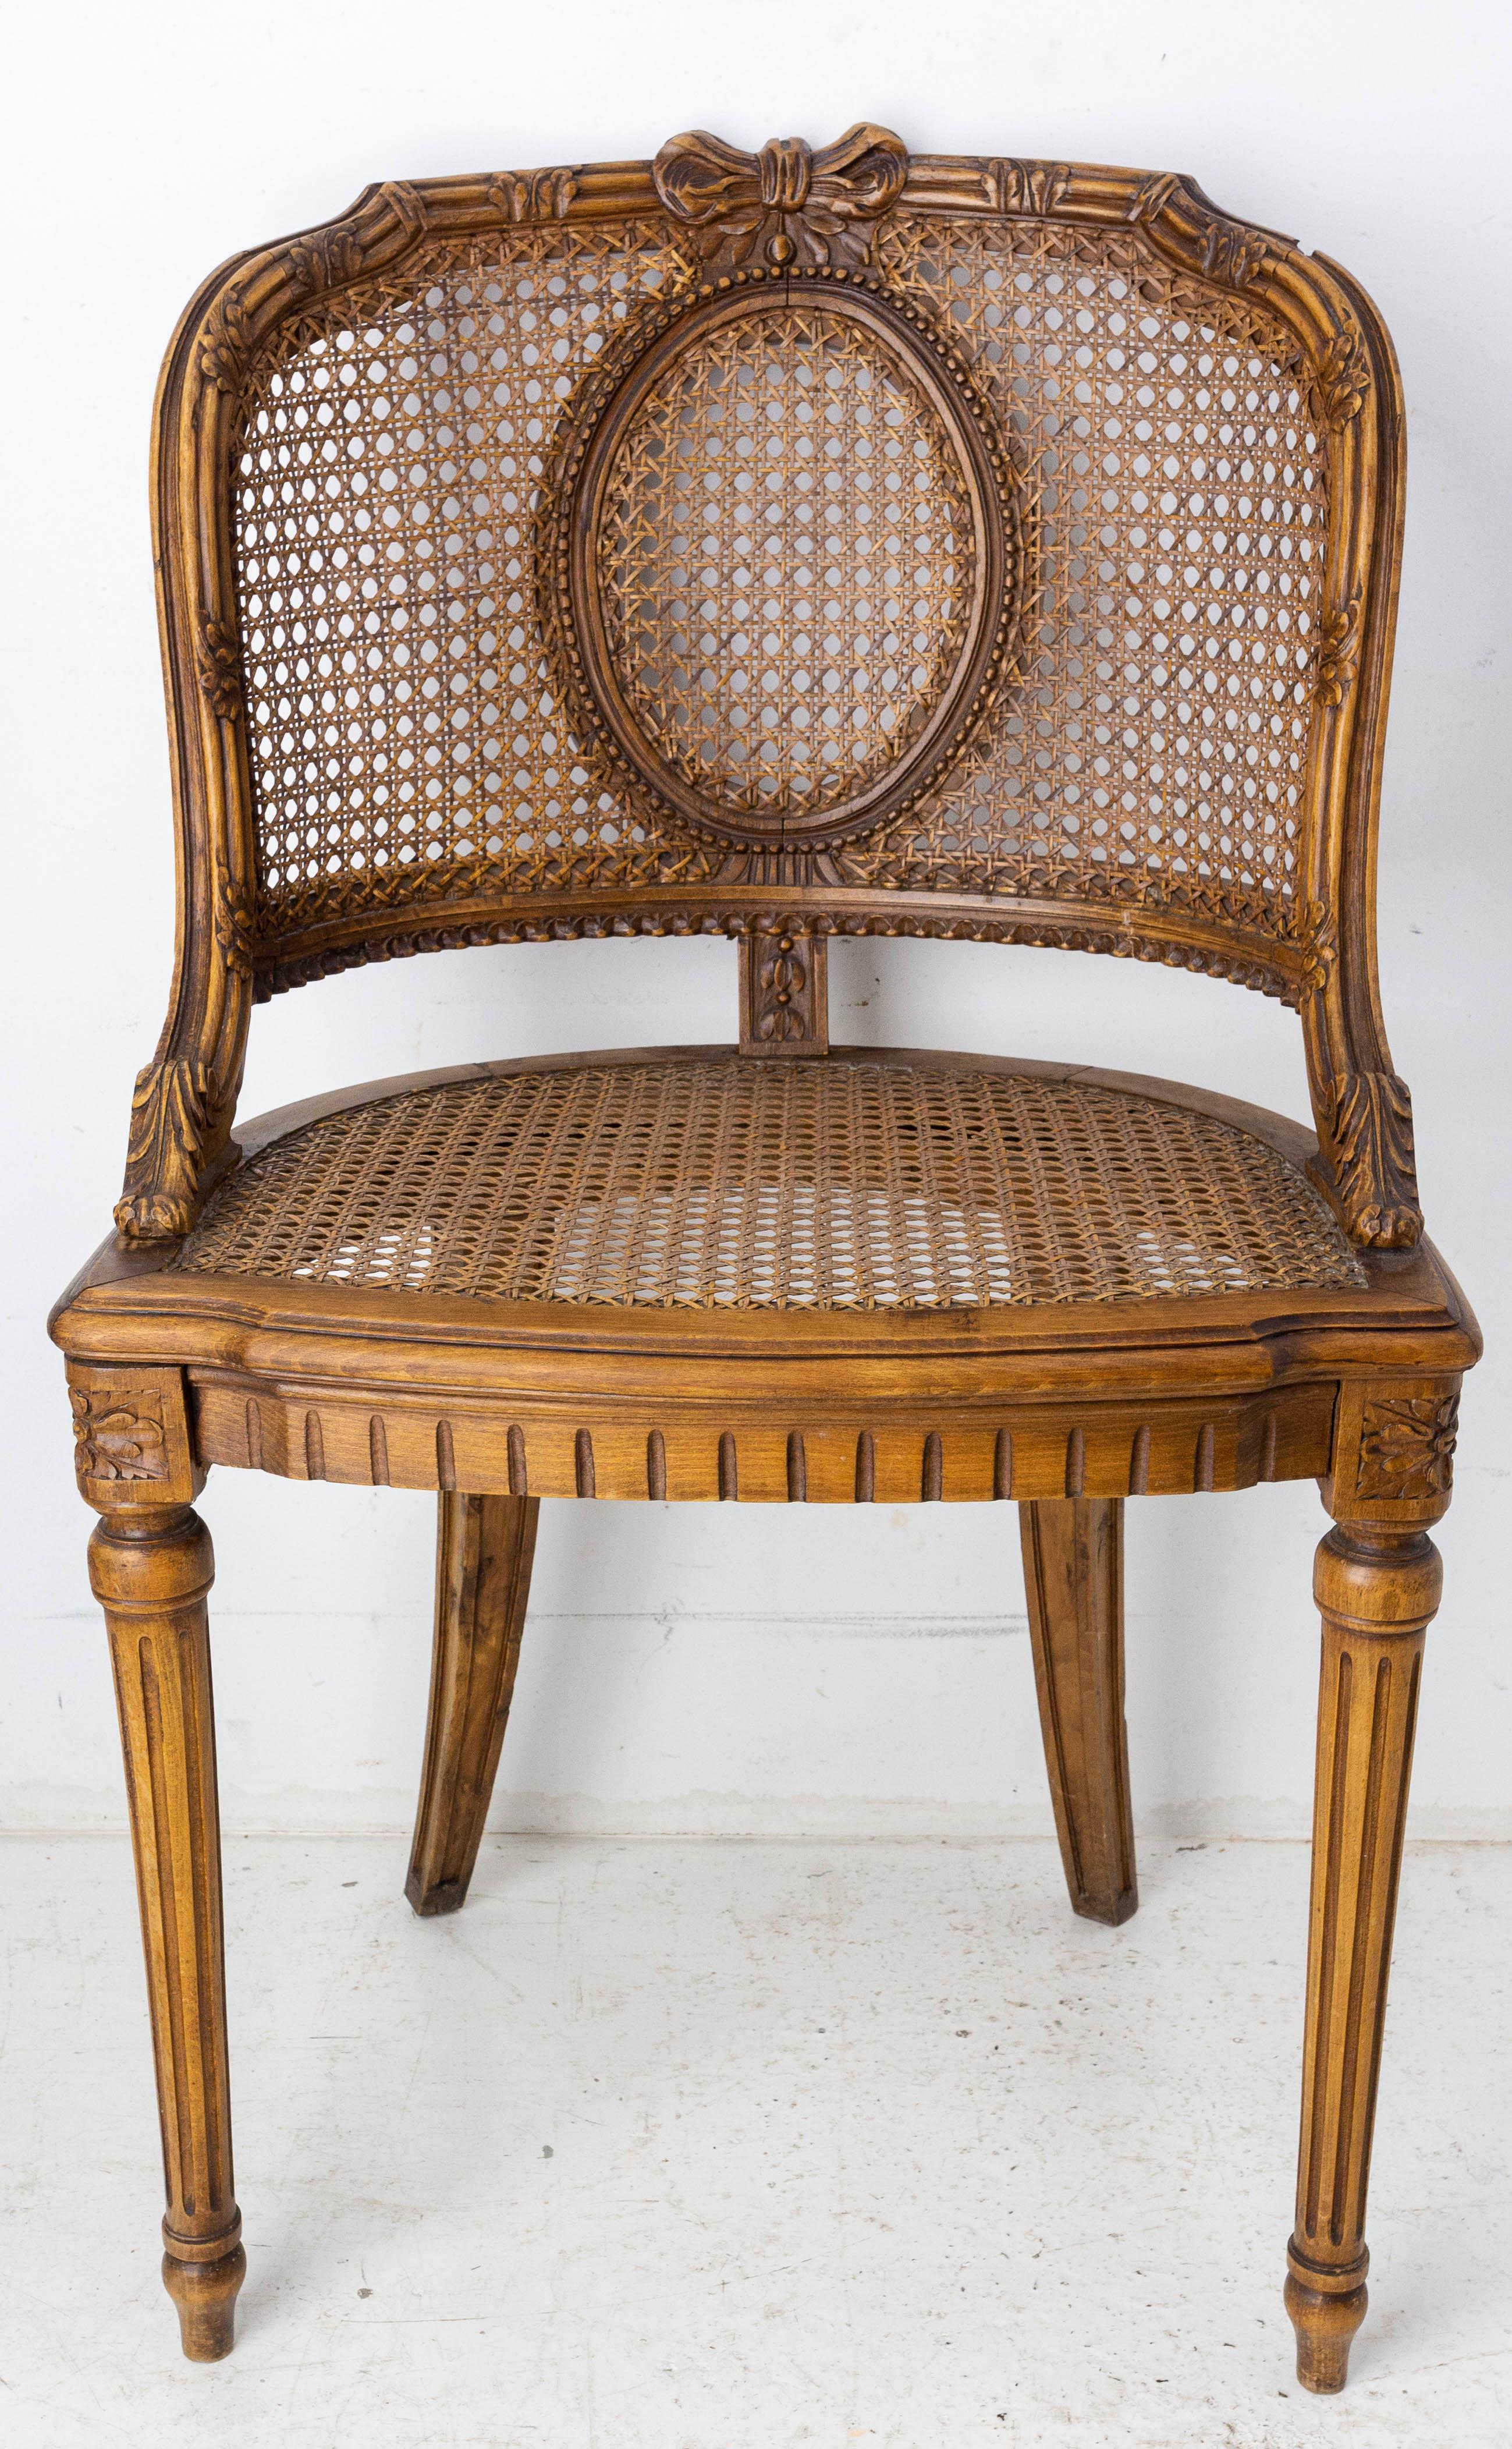 French chair in the Louis 16 style.
Medallion motif in the frame of the chair.
Beech and cane.
Good condition.

Shipping :
48 / 50 / 85 cm 4.1 kg.